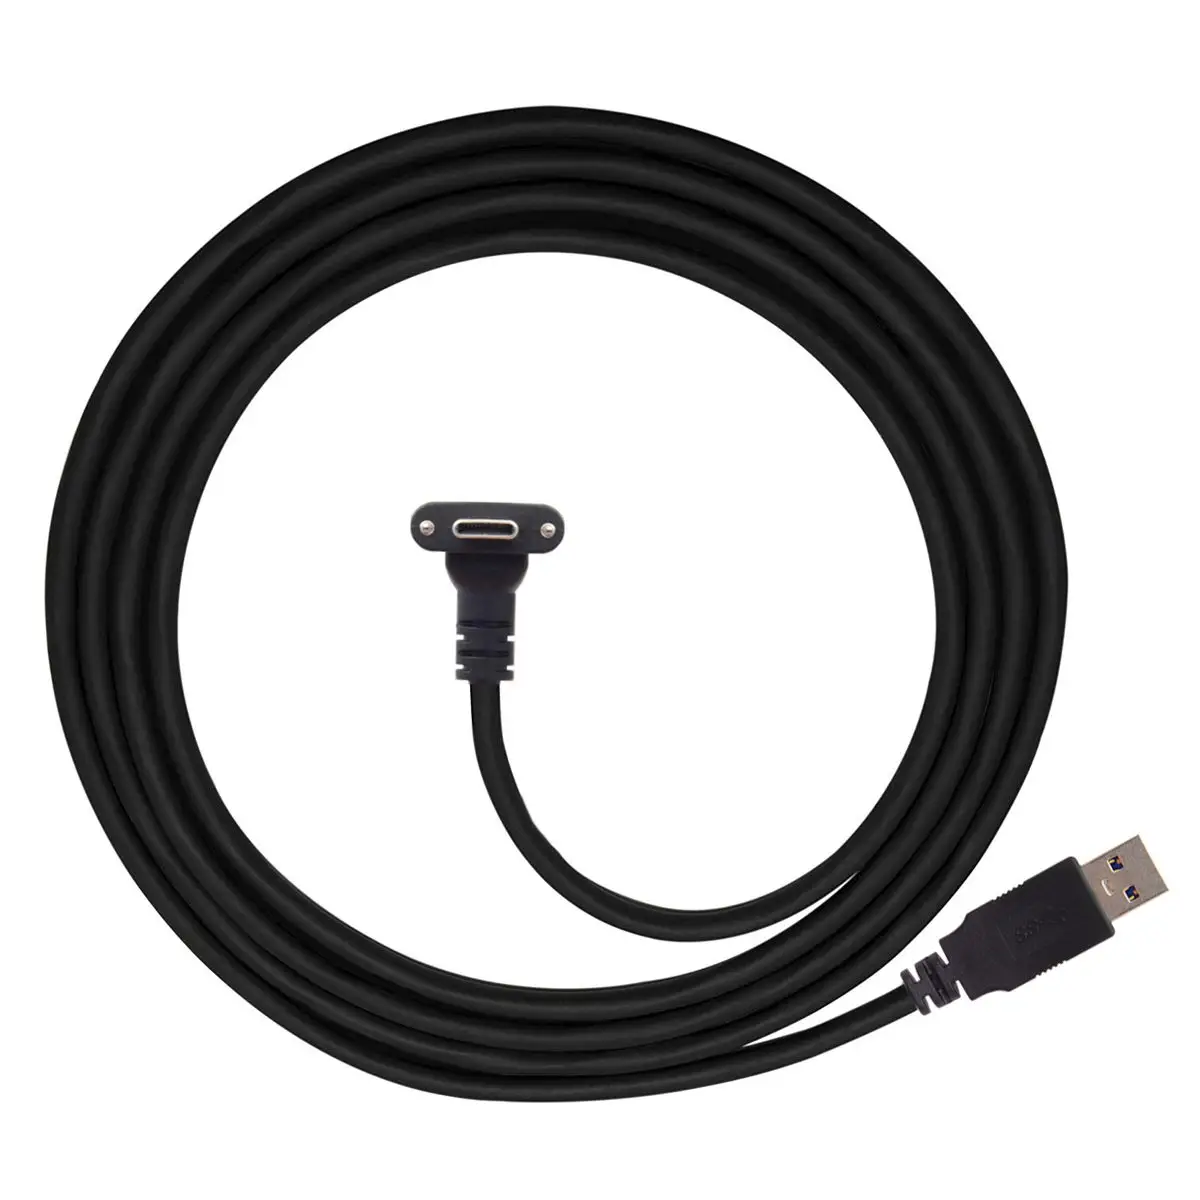 

Chenyang Type-C USB 3.1 Dual Screw Locking to Standard USB3.0 Data Cable Up Angled 90 Degree Fit for Oculus Link VR